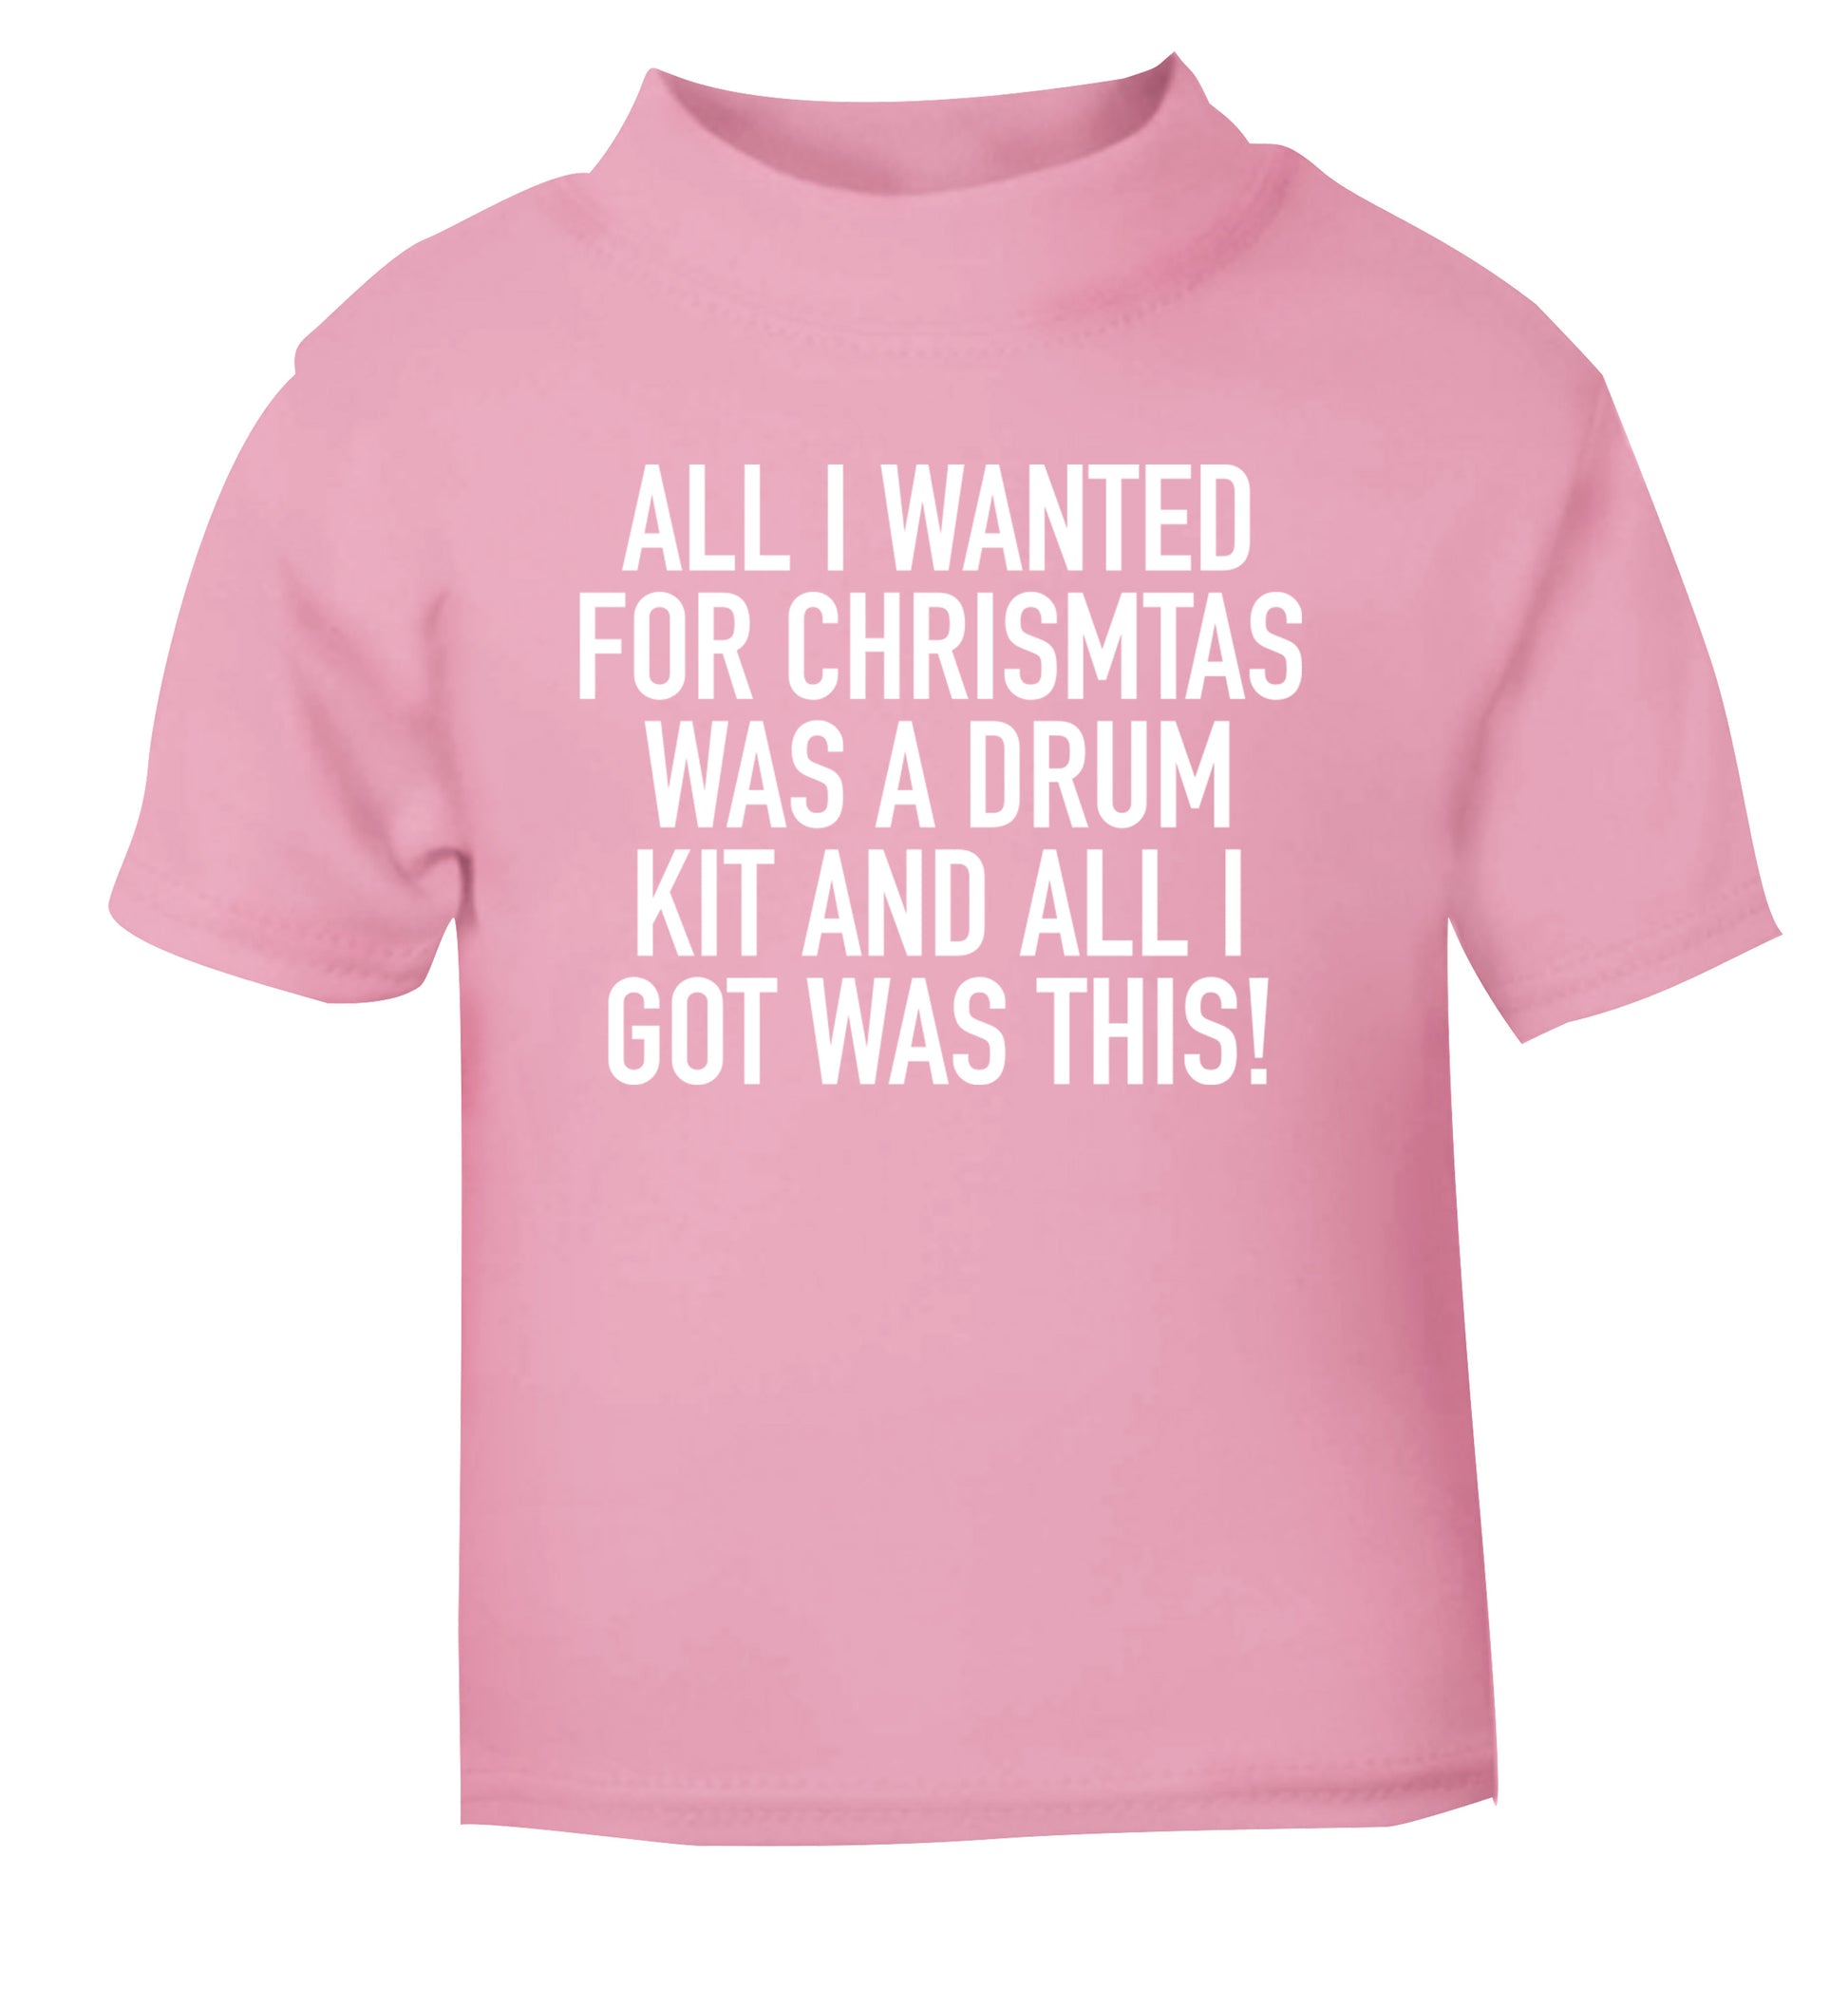 All I wanted for Christmas was a drum kit and all I got was this! light pink Baby Toddler Tshirt 2 Years